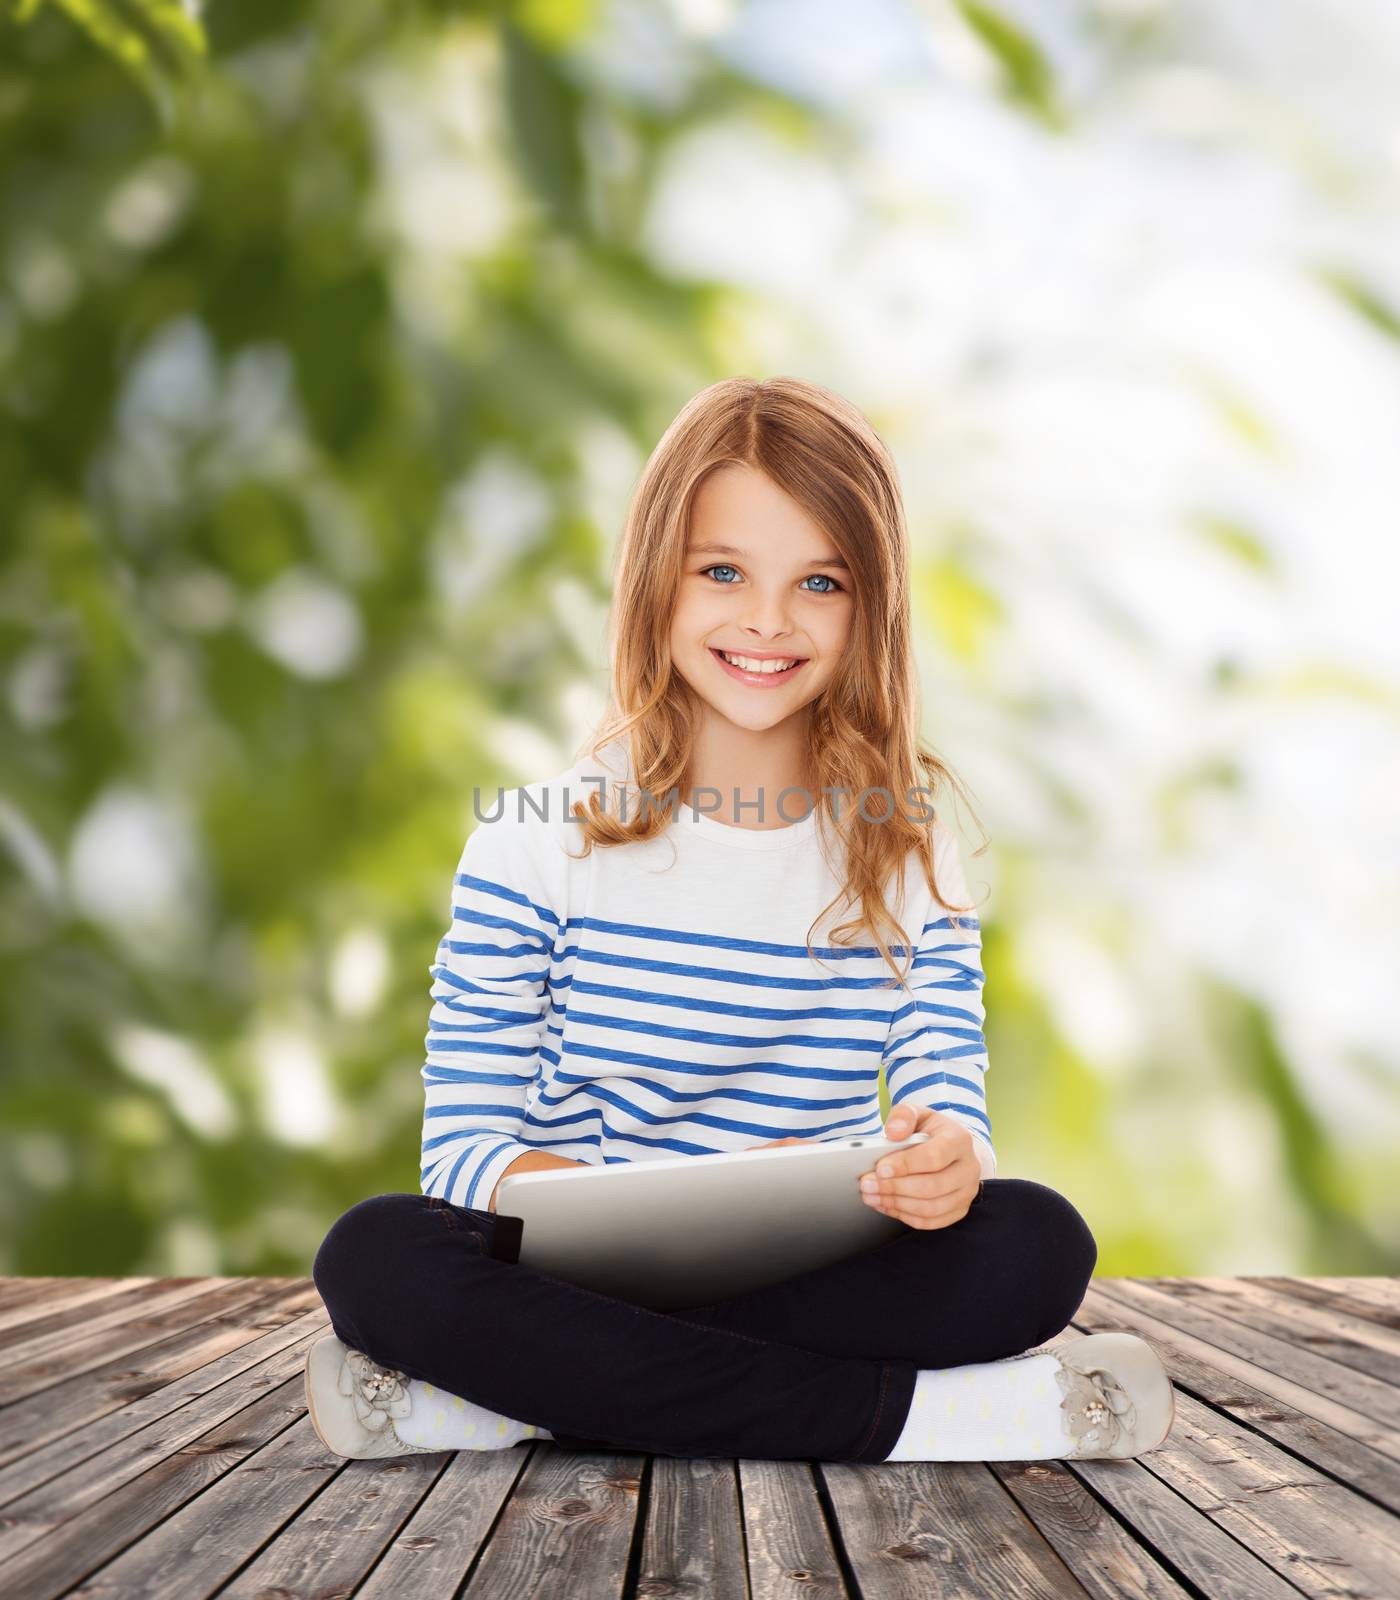 student girl with tablet pc by dolgachov